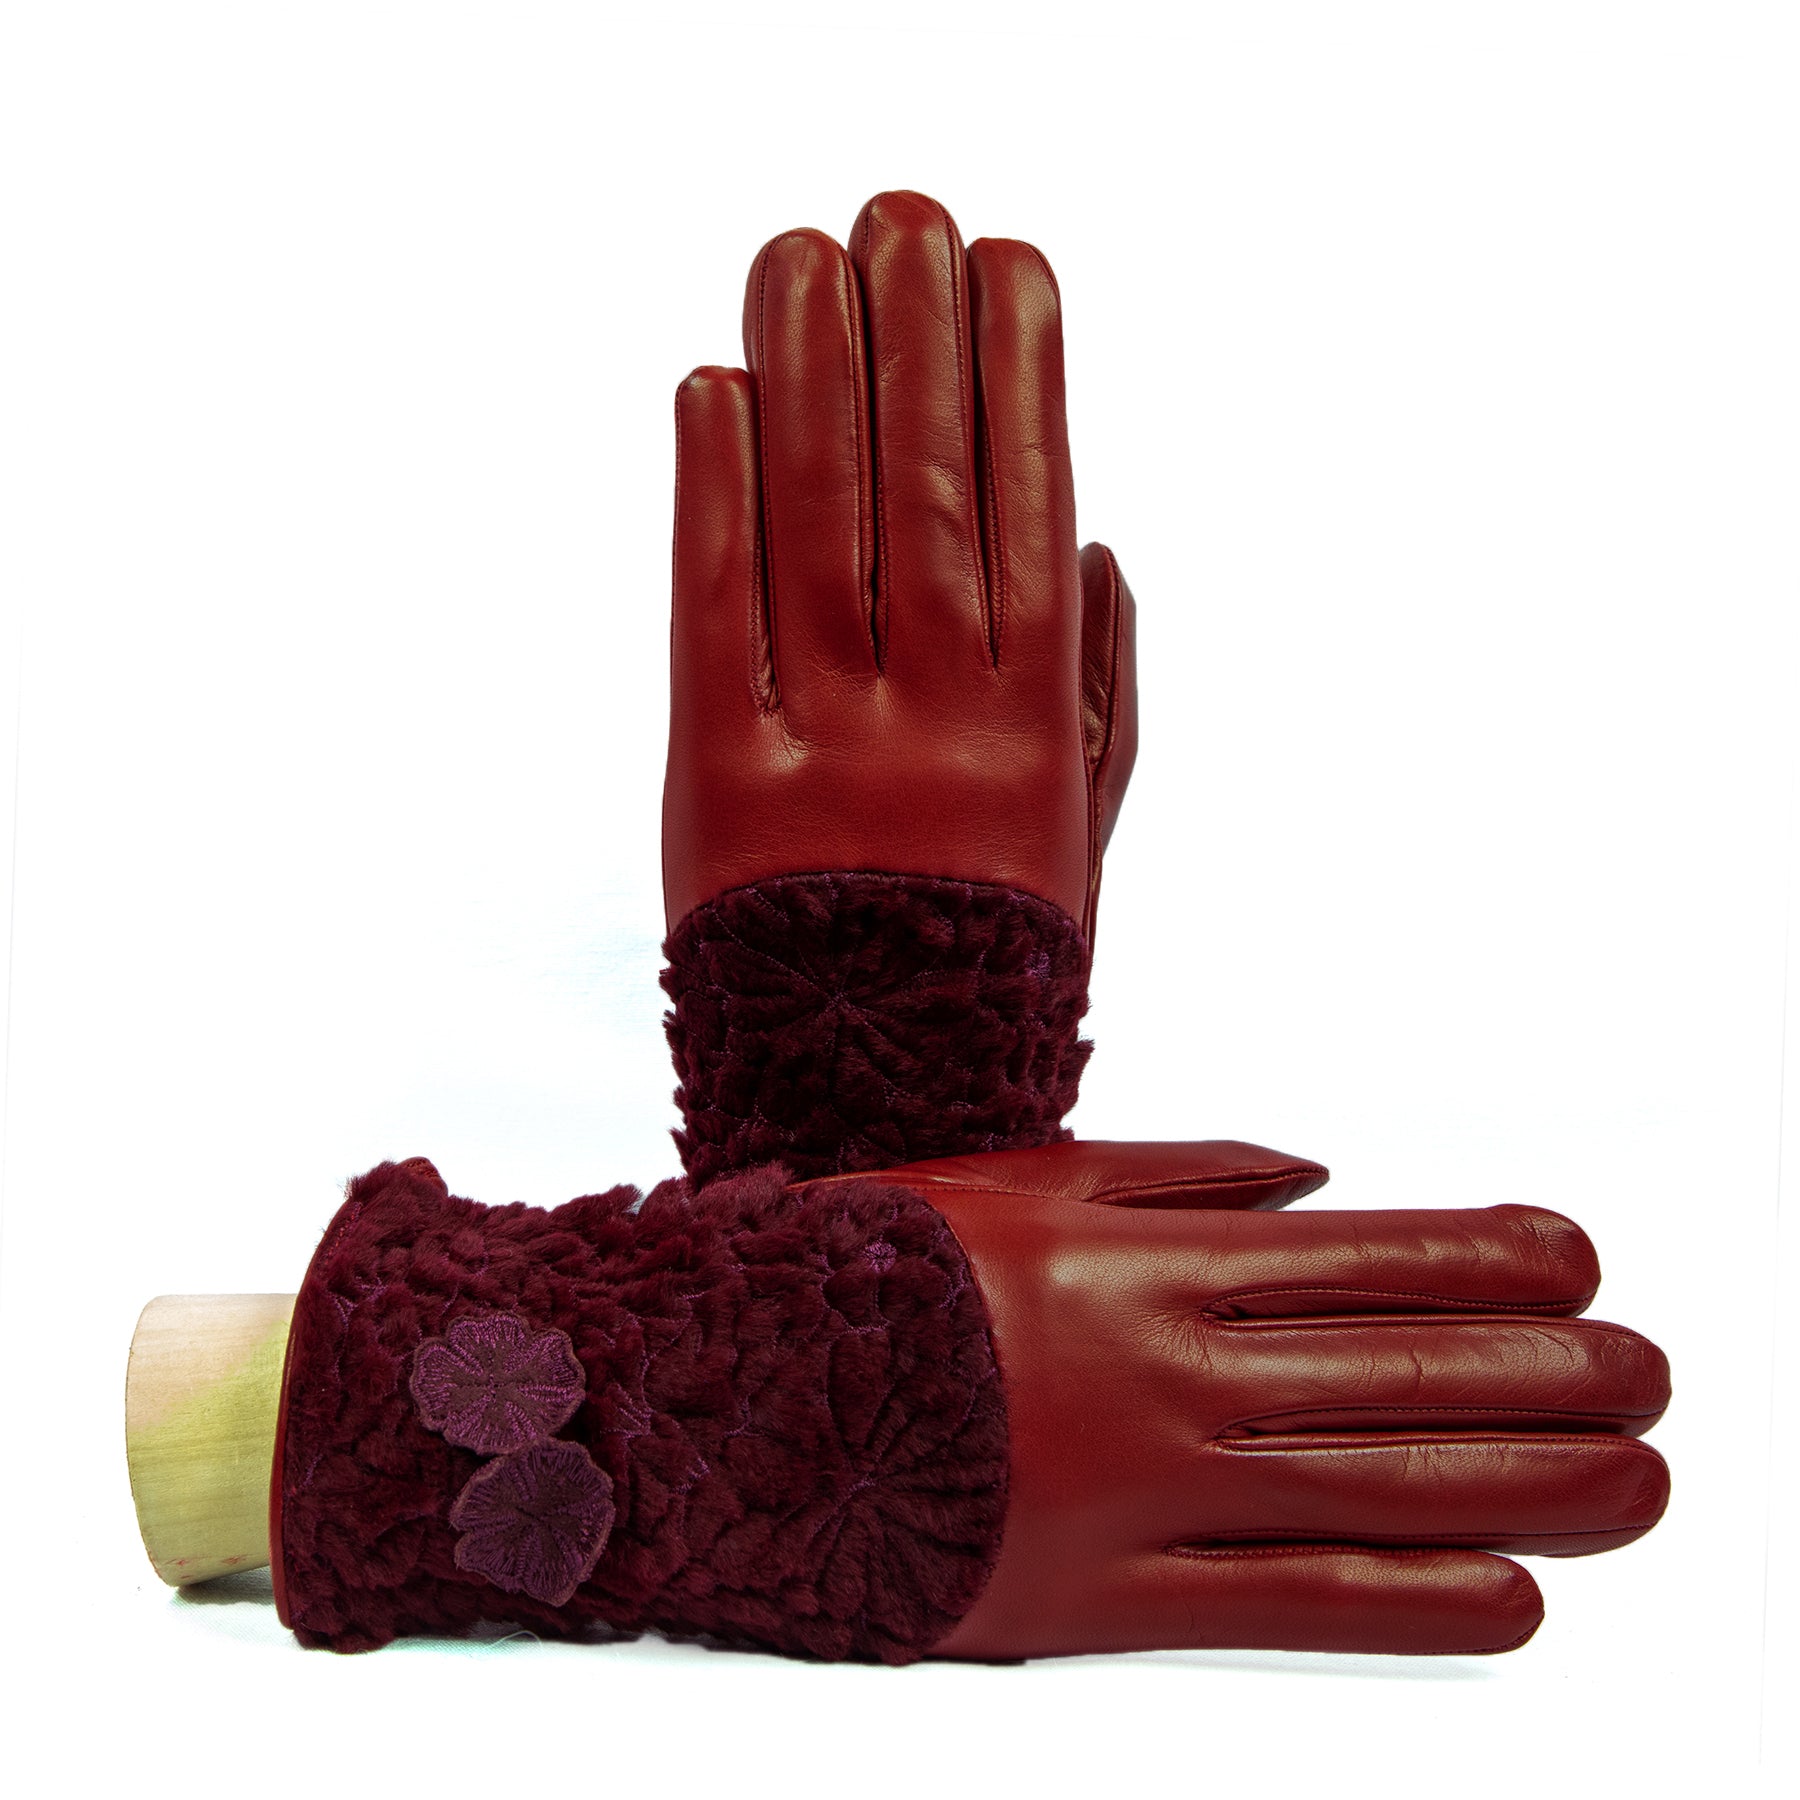 Women's burgundy nappa leather gloves with floral embroidered fur on top